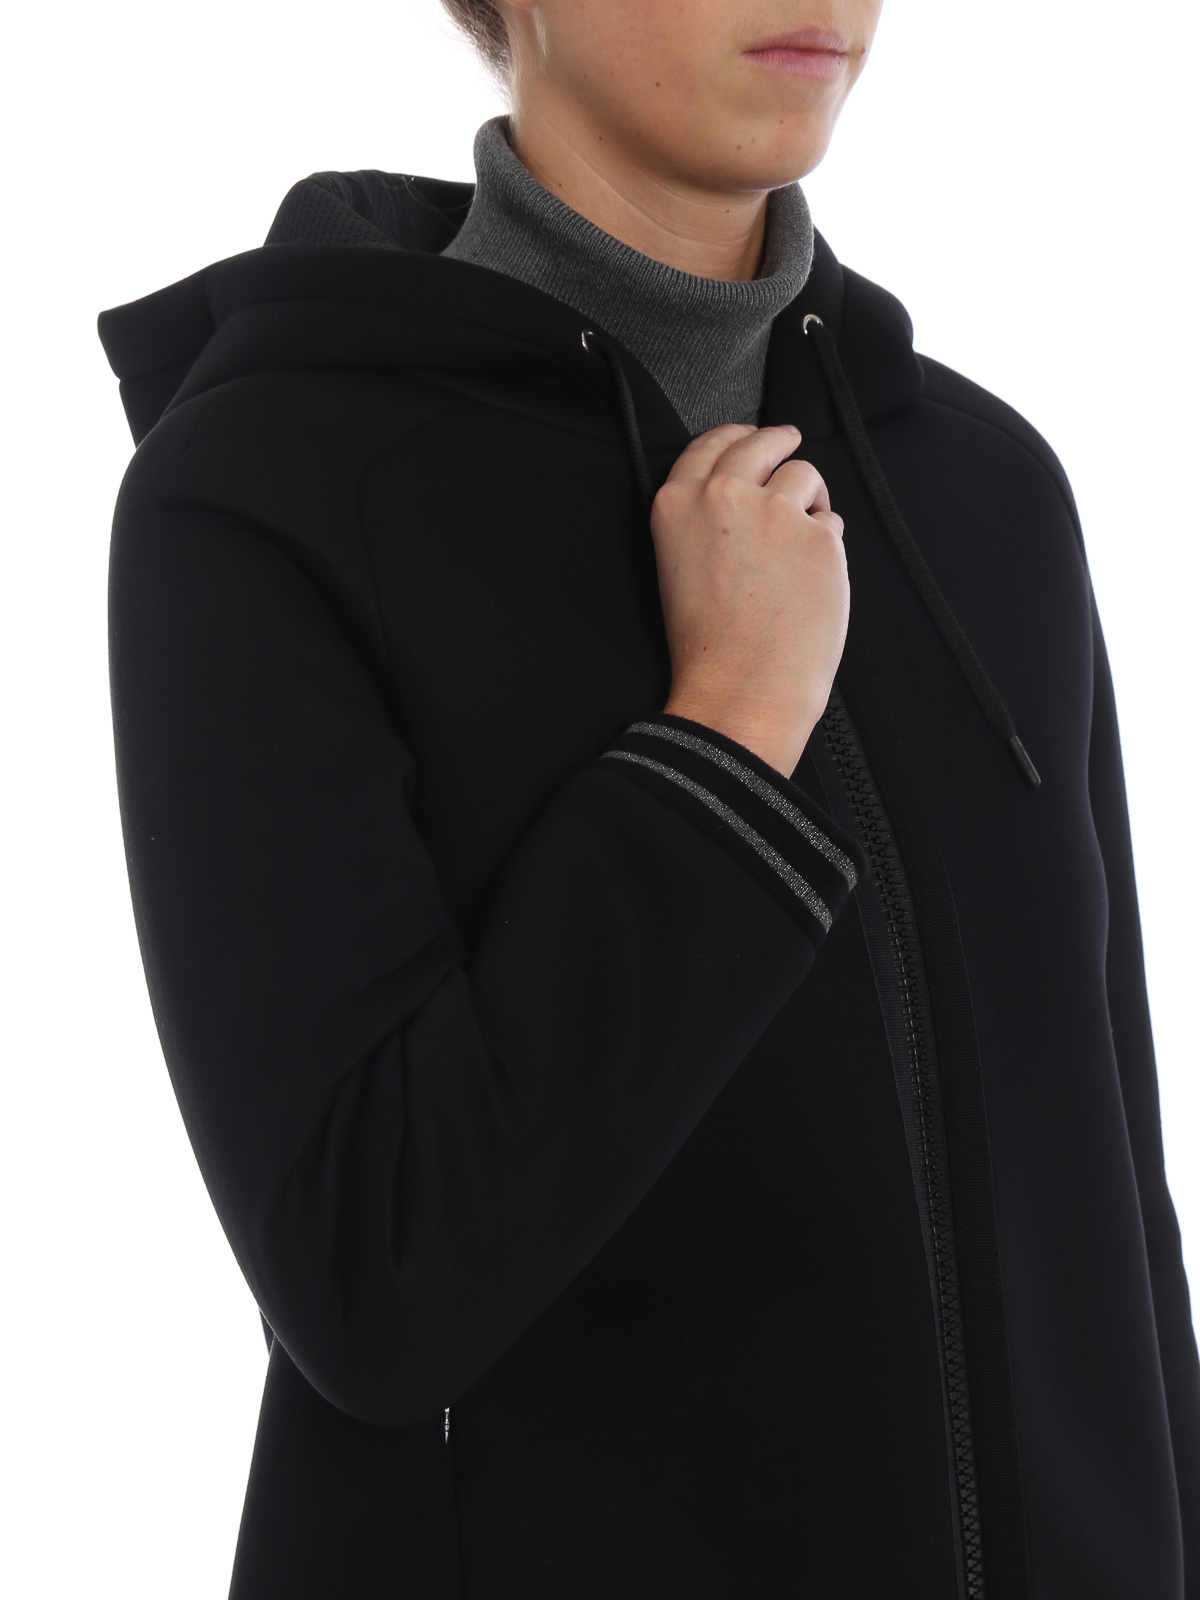 Flotar Percepción Gobernable Casual jackets Herno - Neoprene hooded jacket with rib-knitted edges -  GC007DR124009393